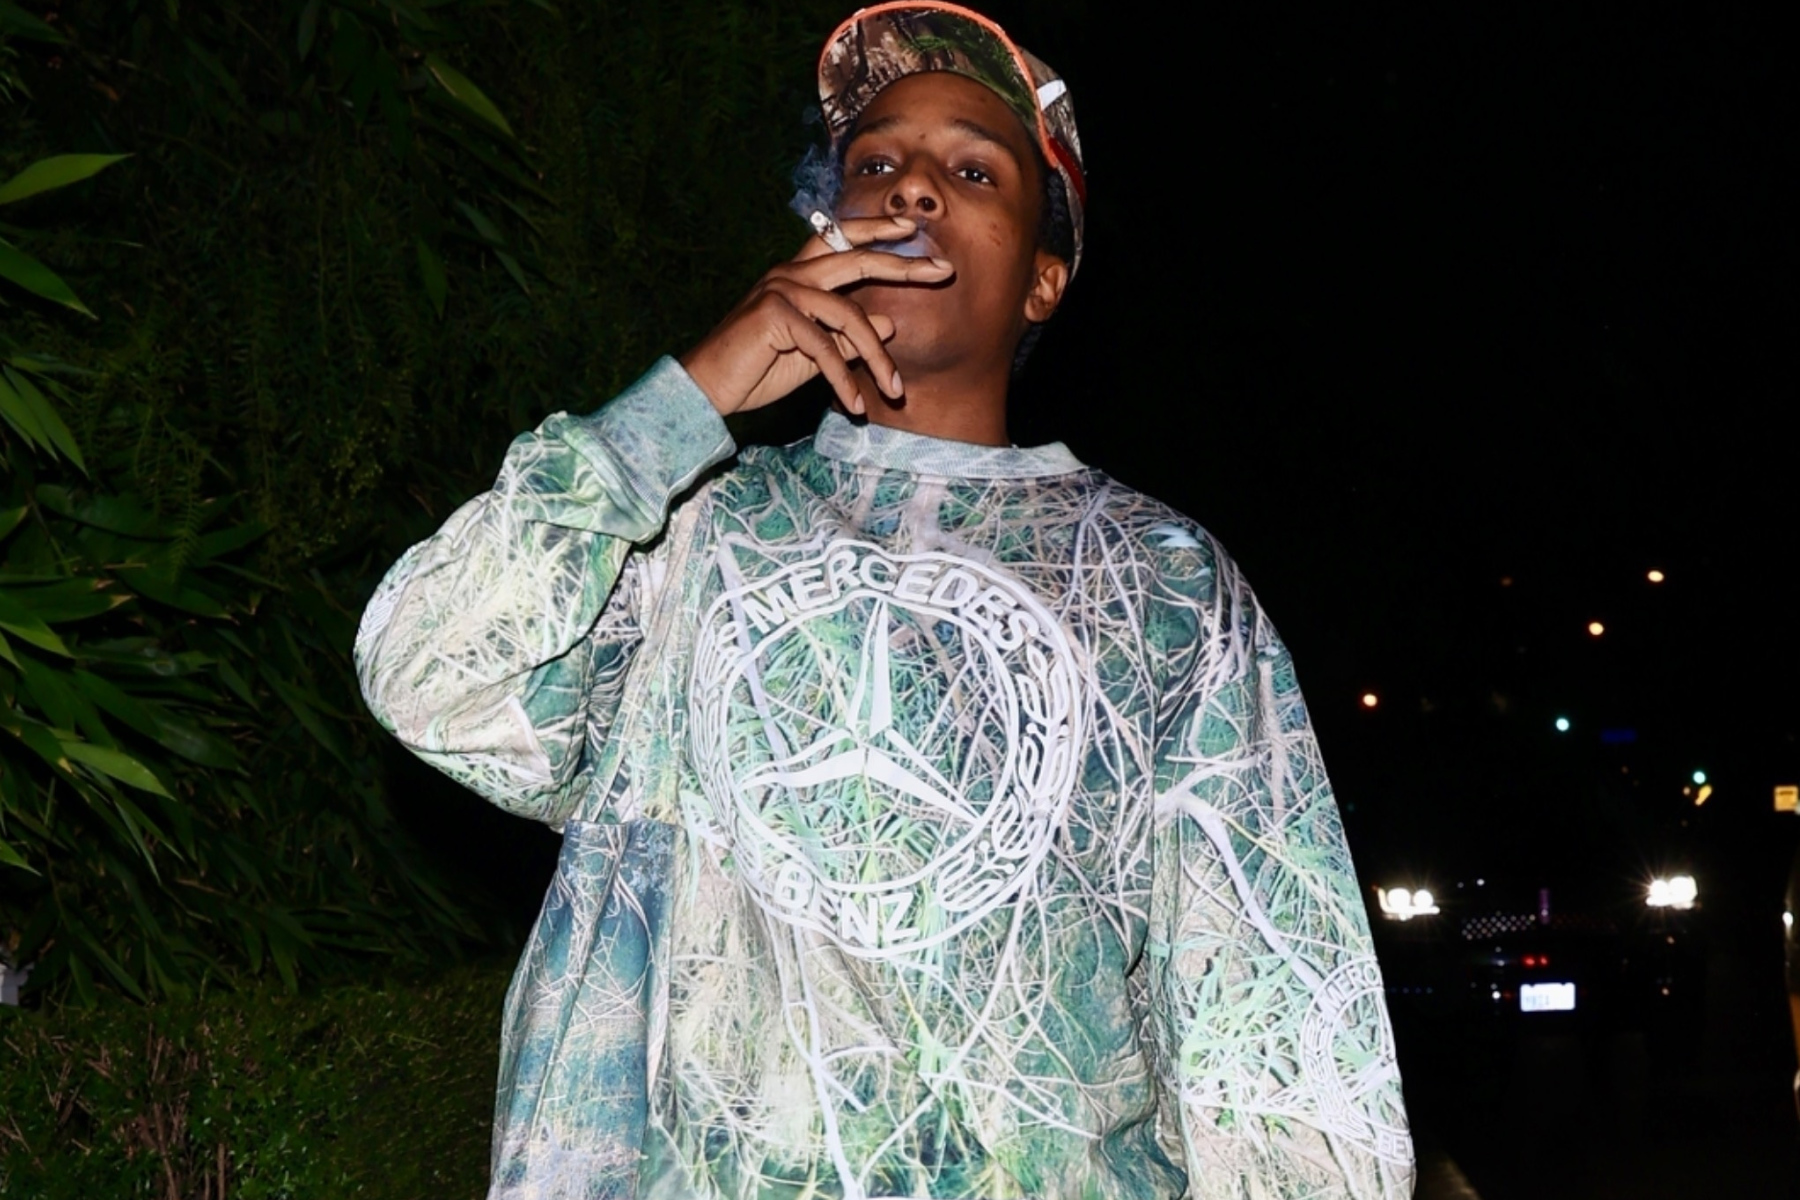 A$AP Rocky is stylish as he steps out from an evening meeting at the San Vicente Bungalows in West Hollywood.